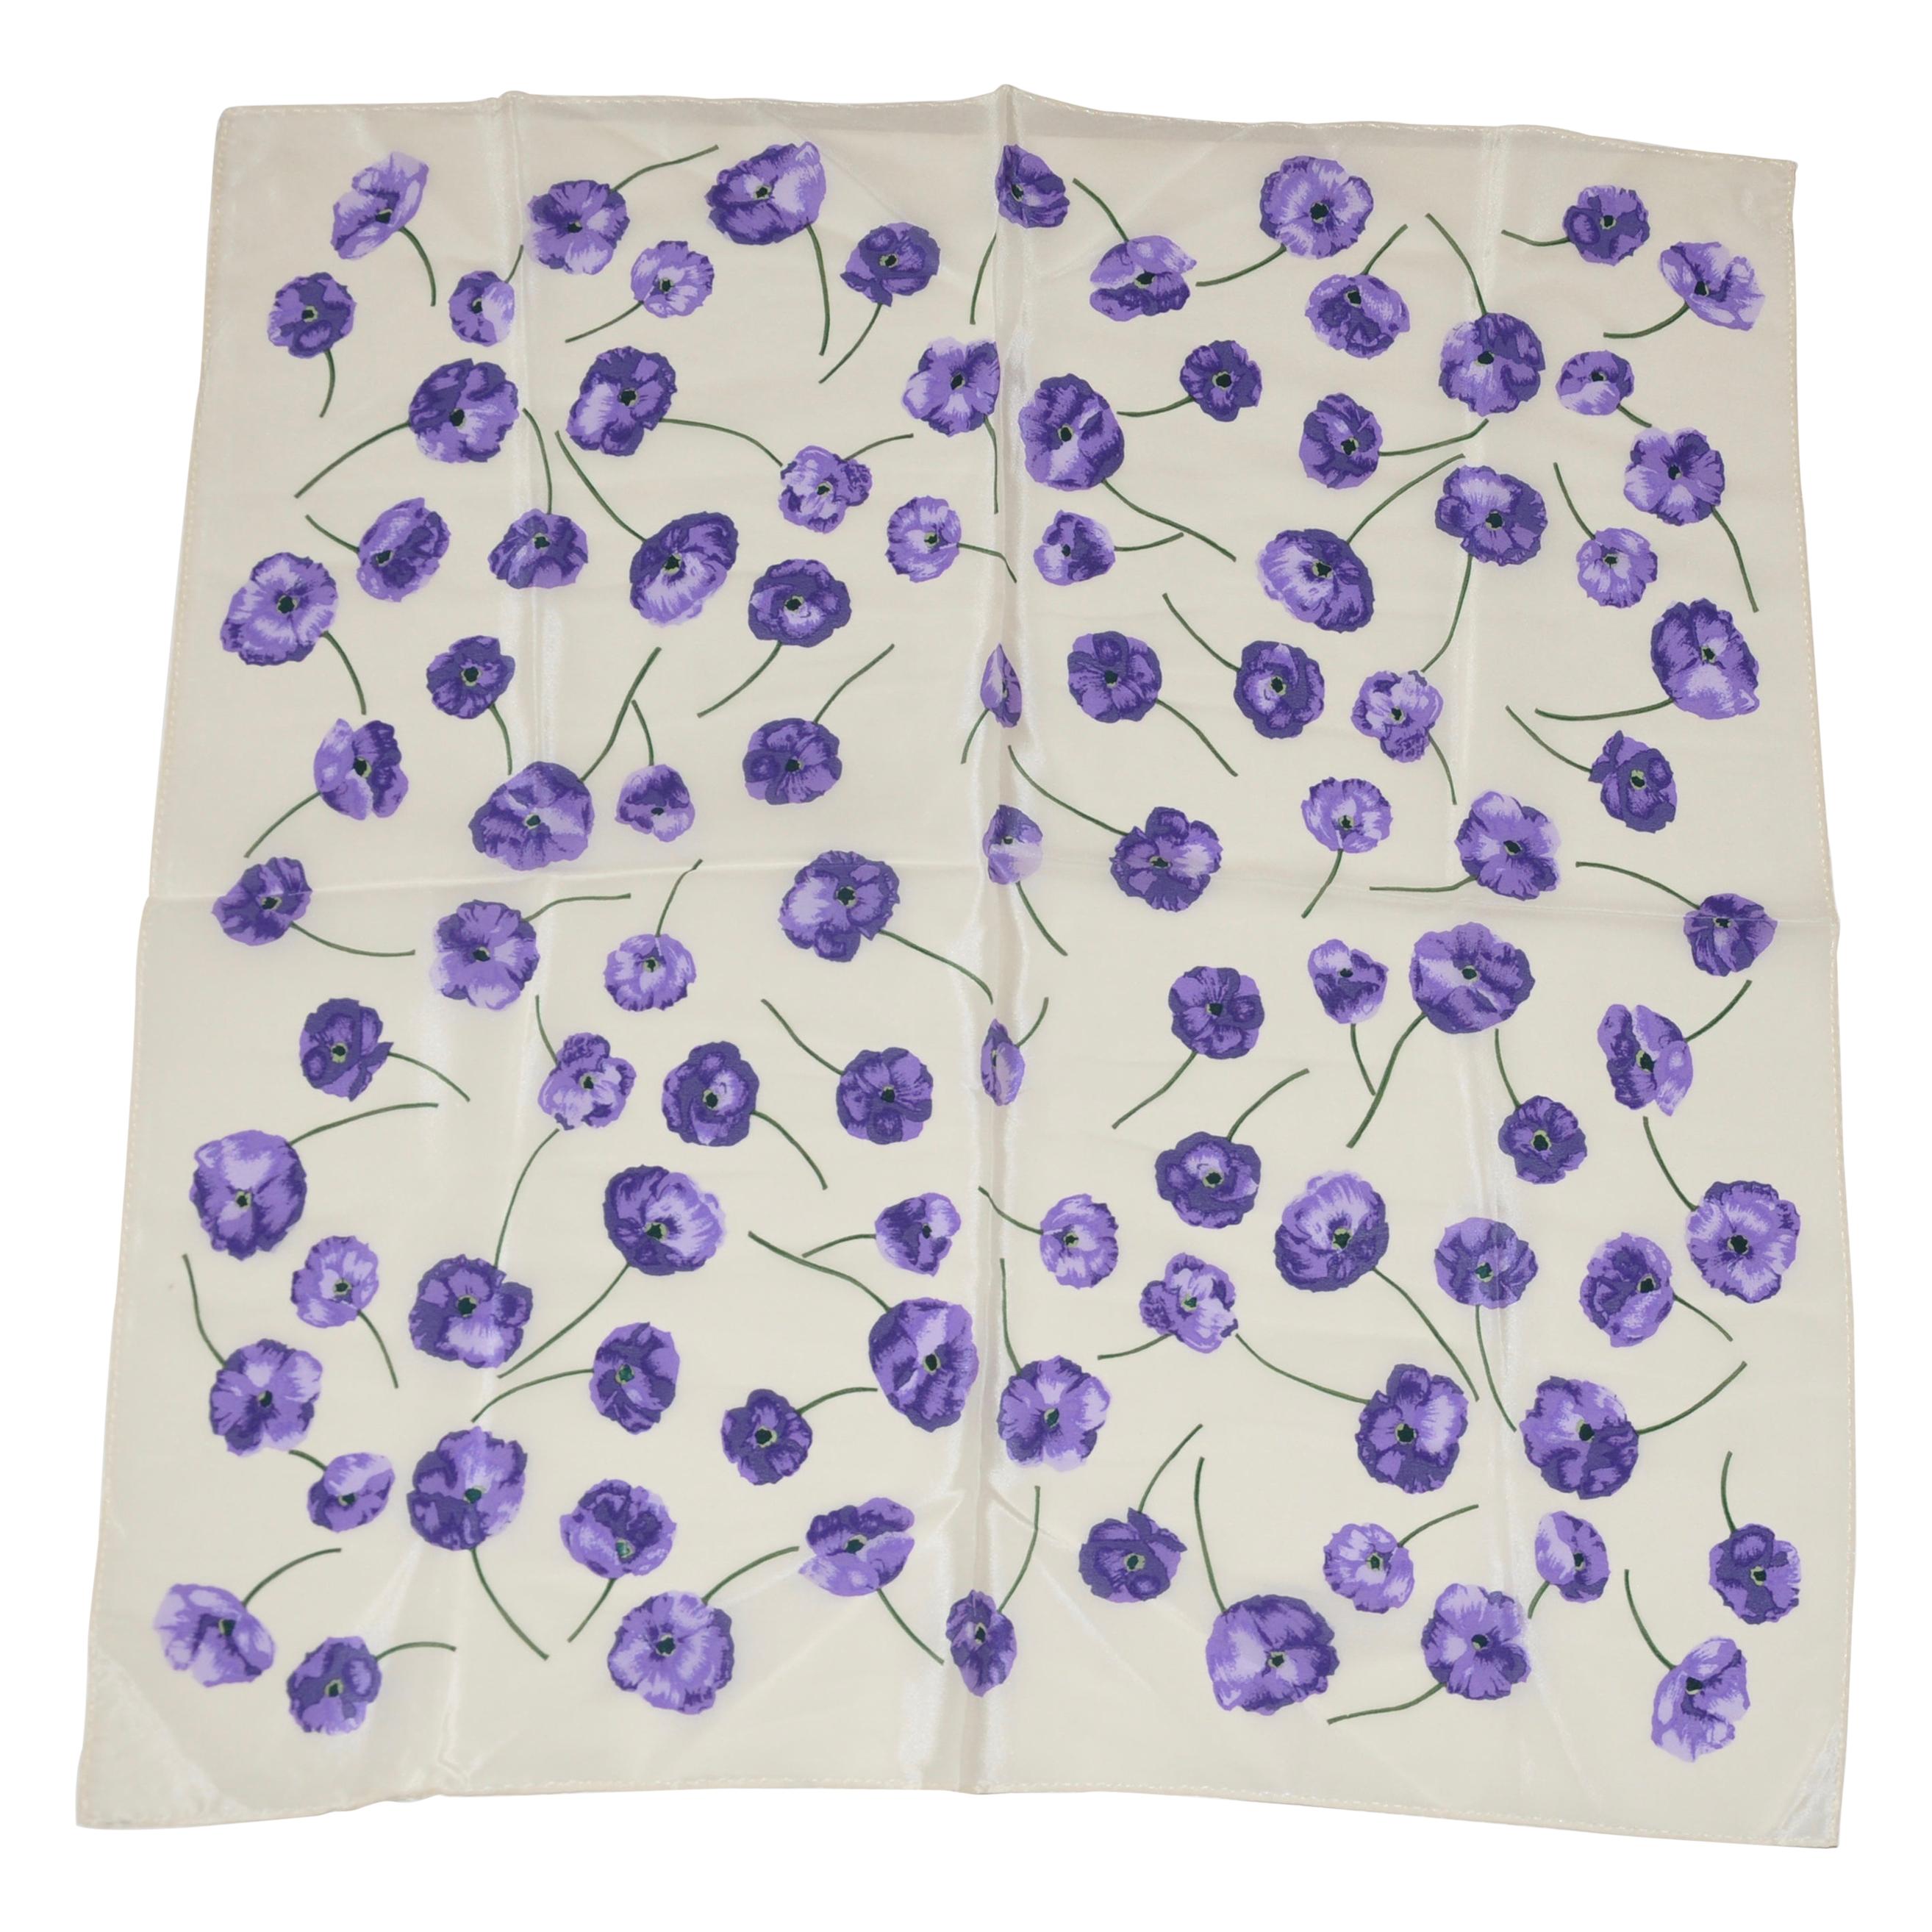 Shades Of Lavender & Violet "Poppies Floral" Silk Scarf For Sale